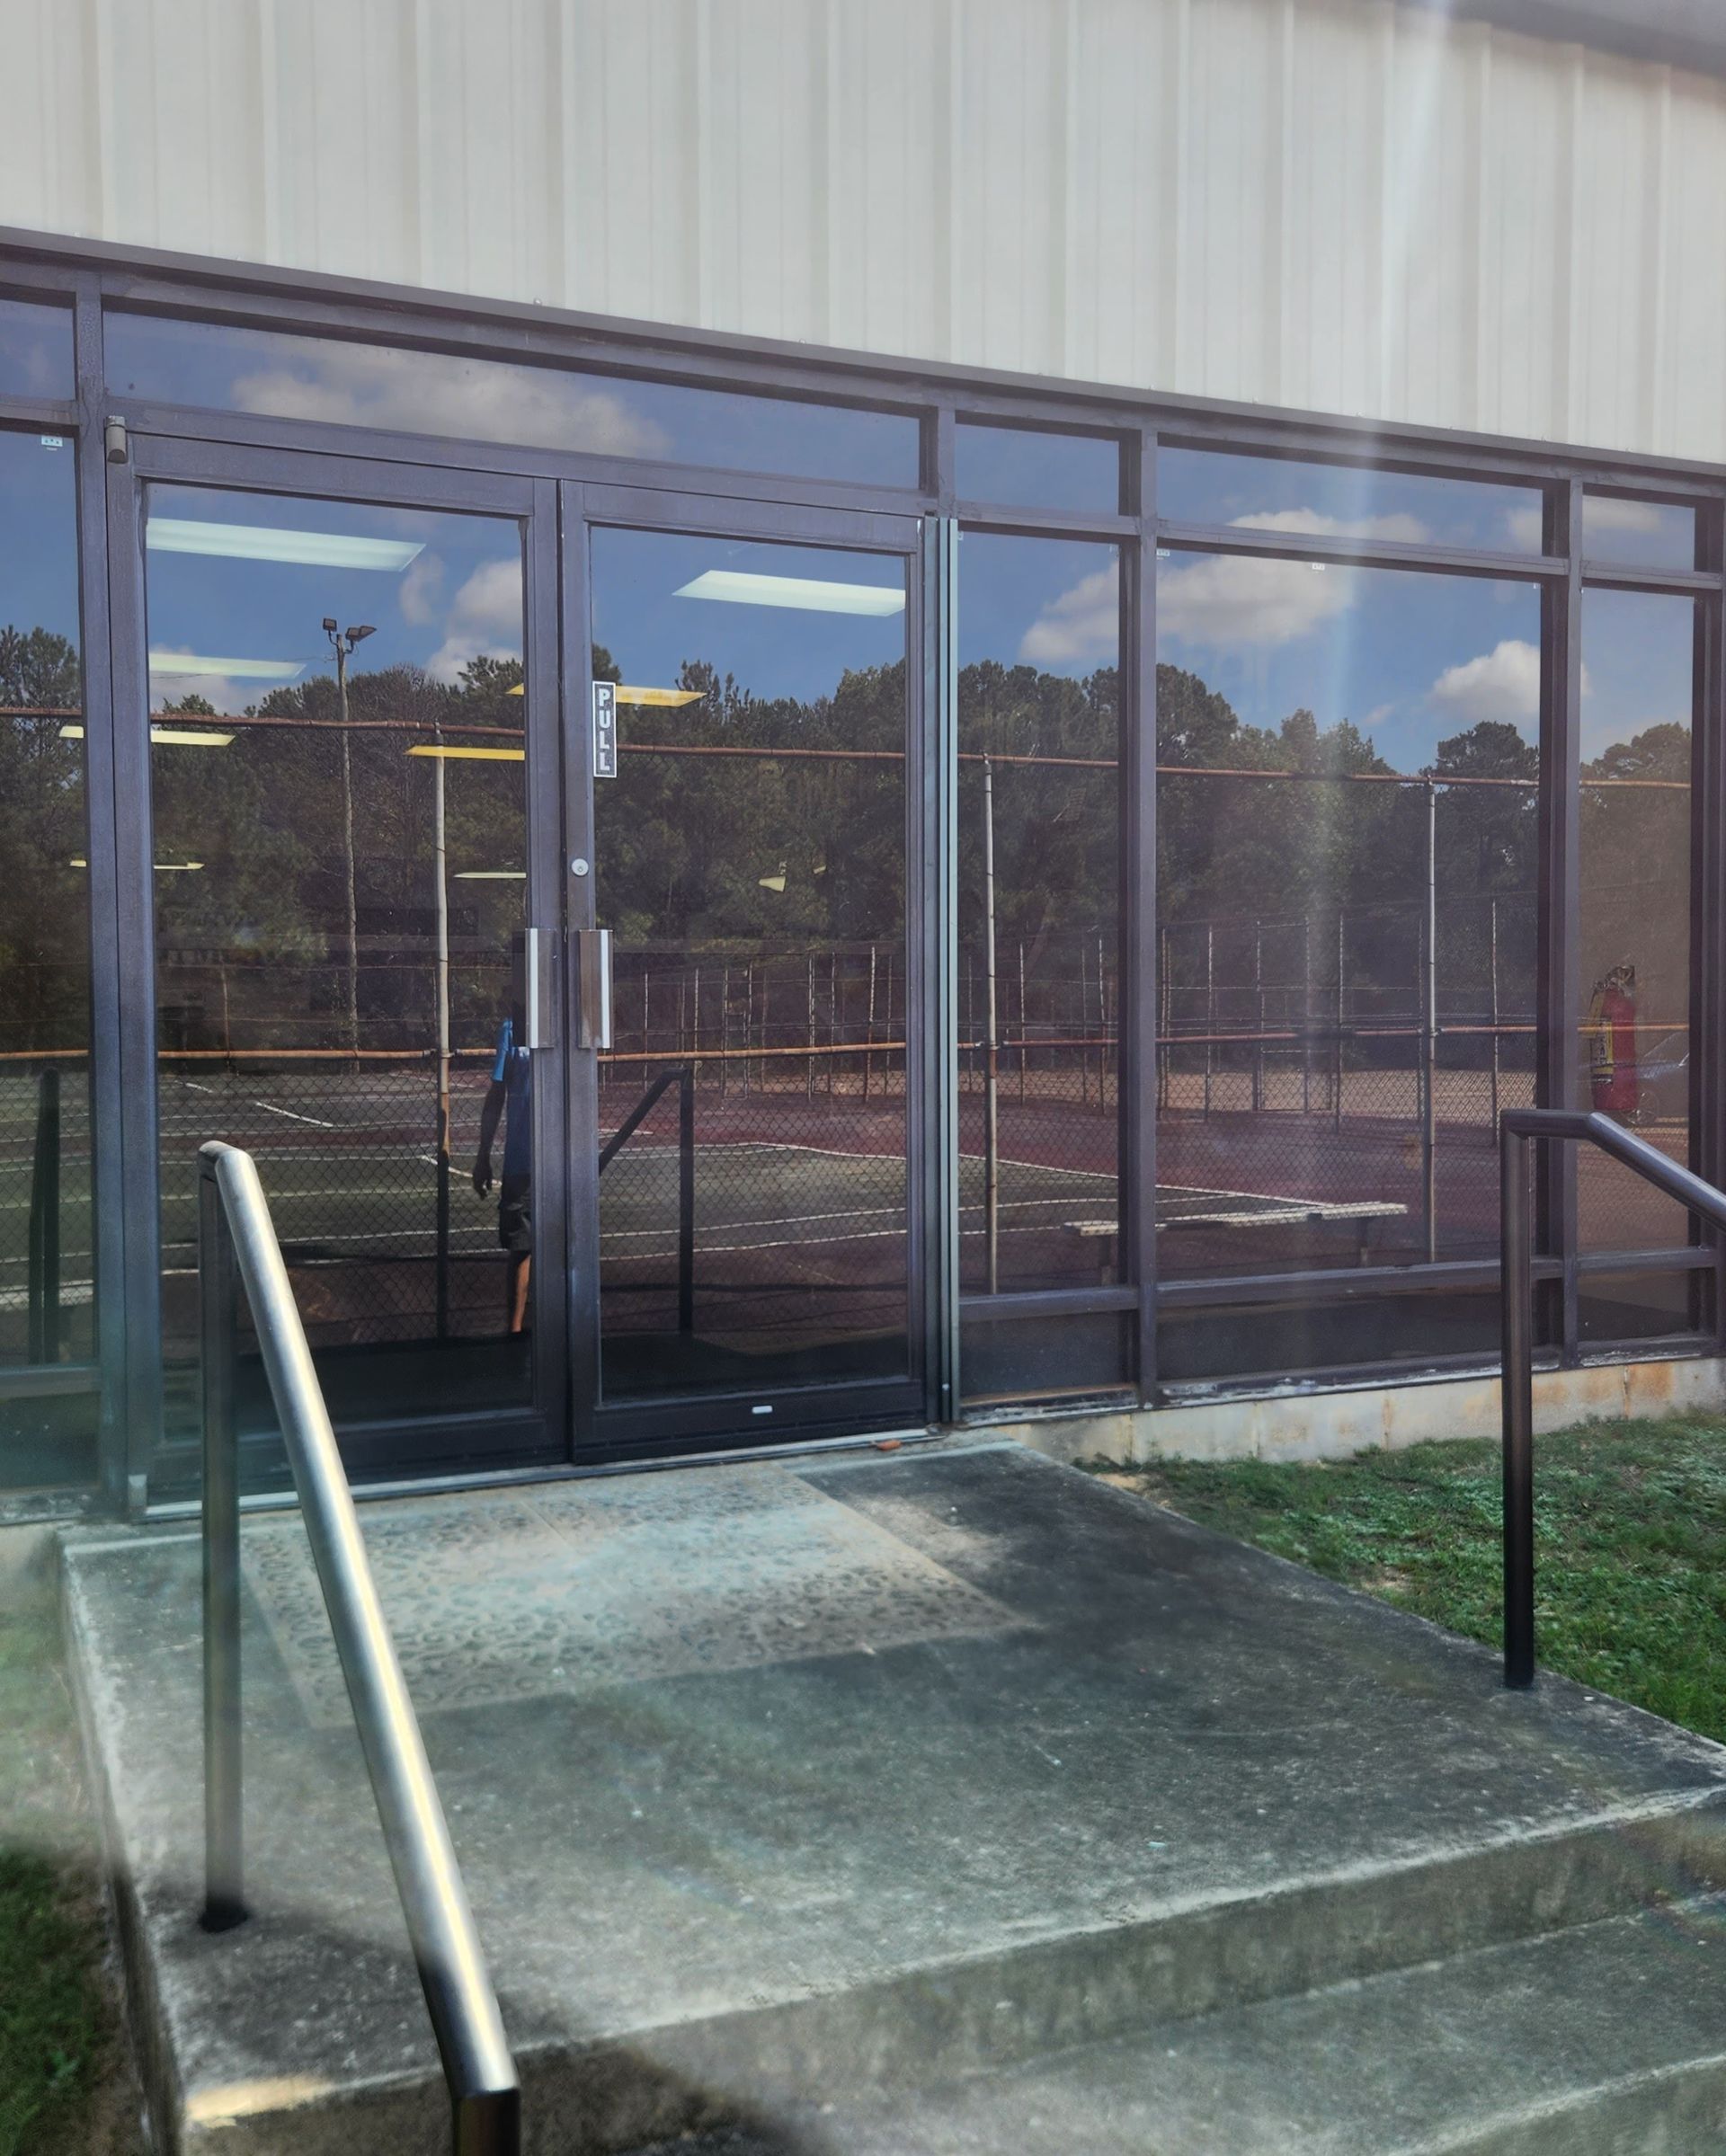 Prattville YMCA gym windows in Prattville Alabama seen here before spf ultra tint was installed adding storm-proof insulation with one-way privacy. Plus top heat-rejection and full UV glare reduction. Prattville AL